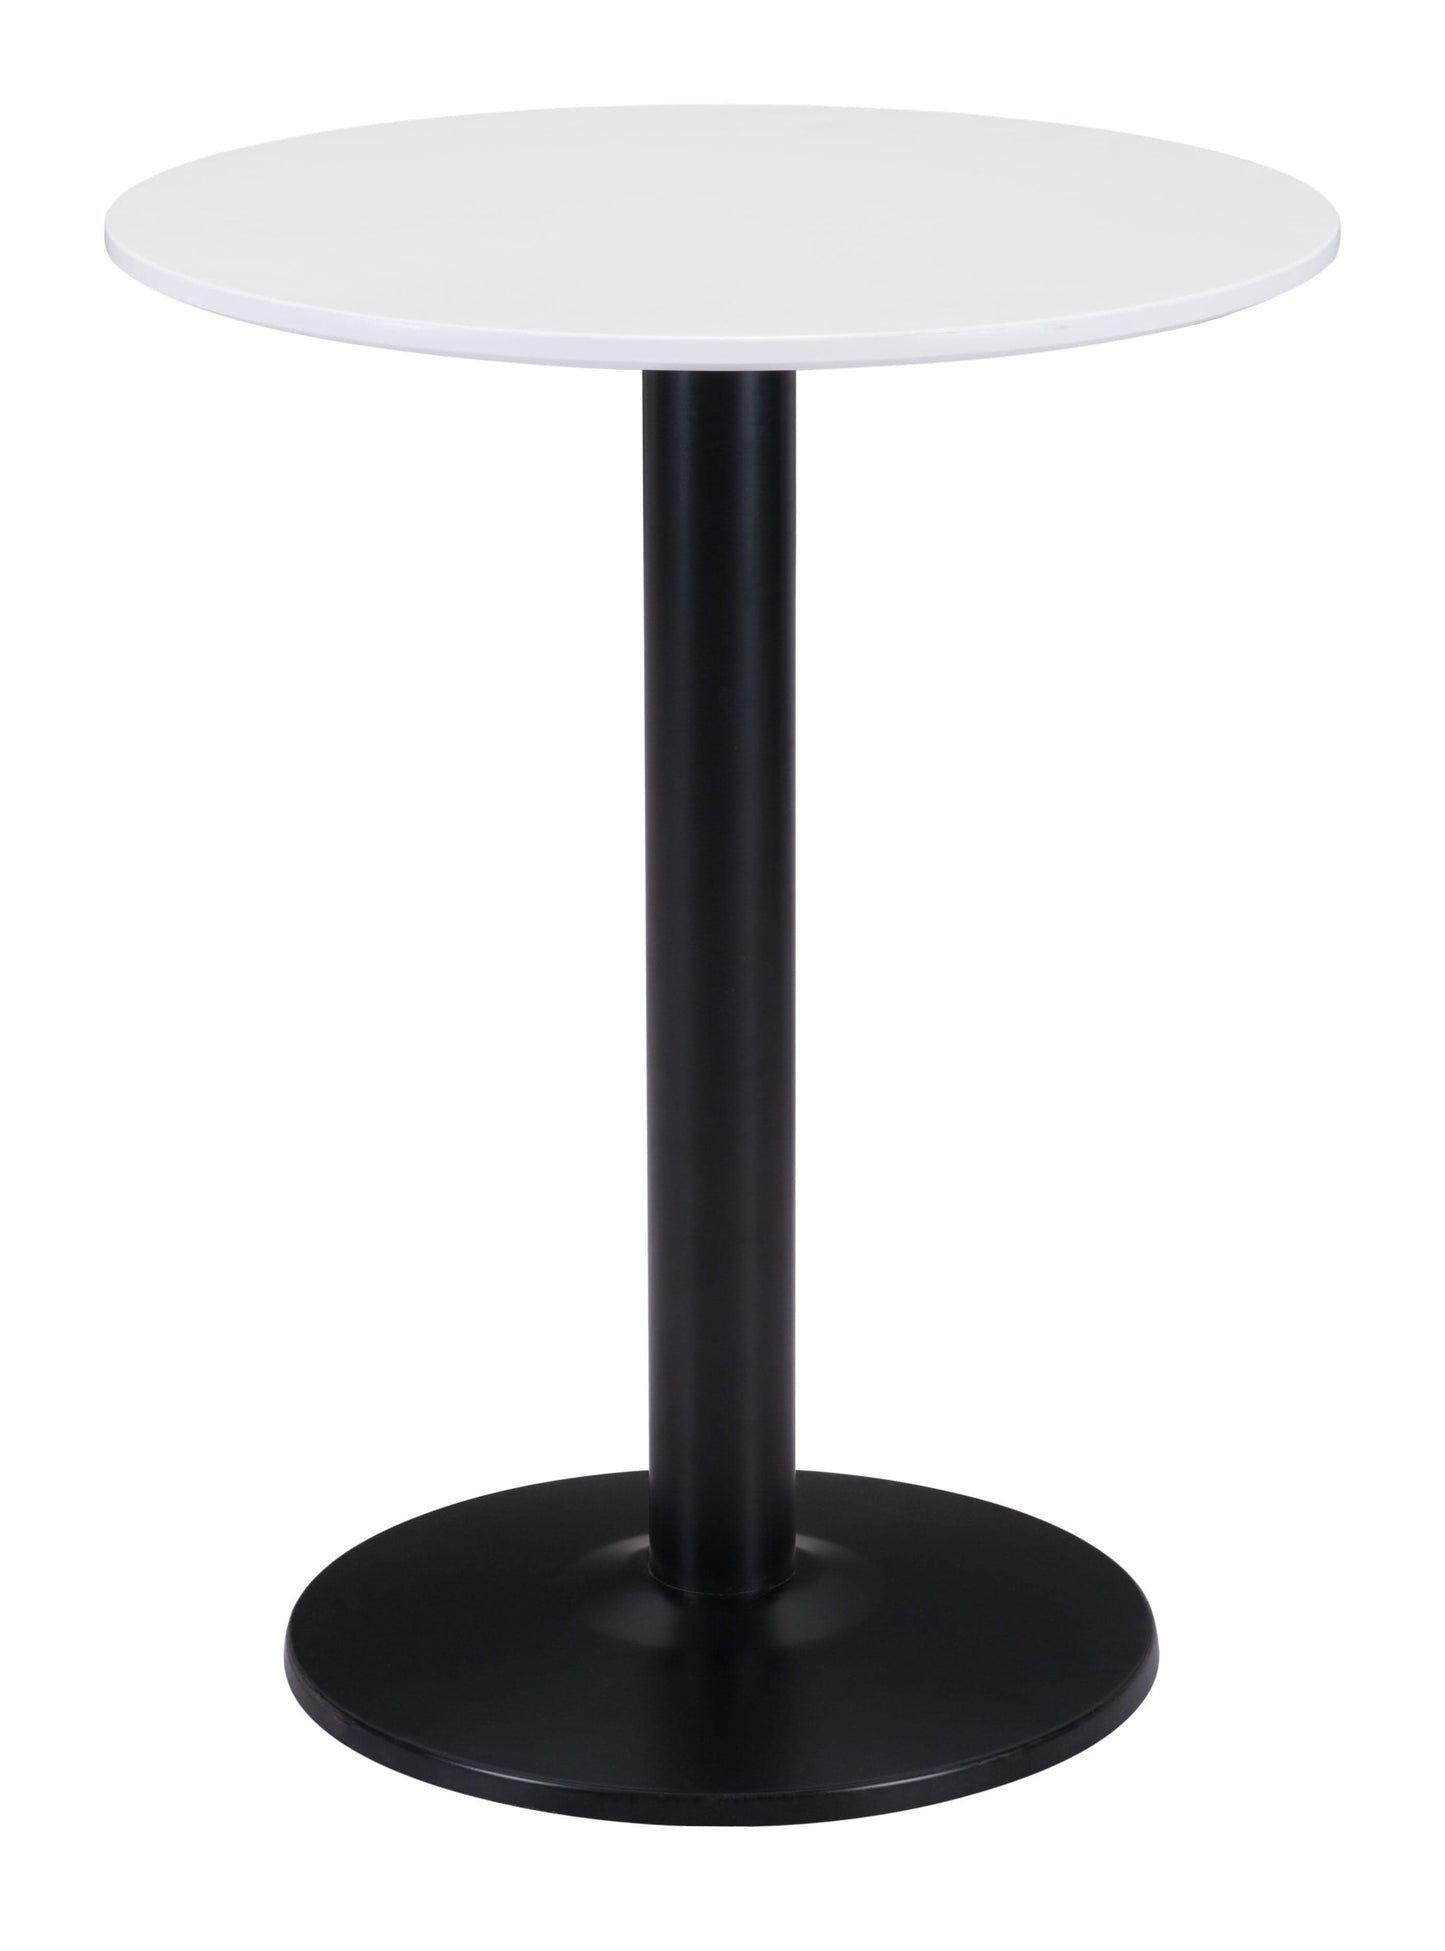 Alto Bistro Table is commercial quality 